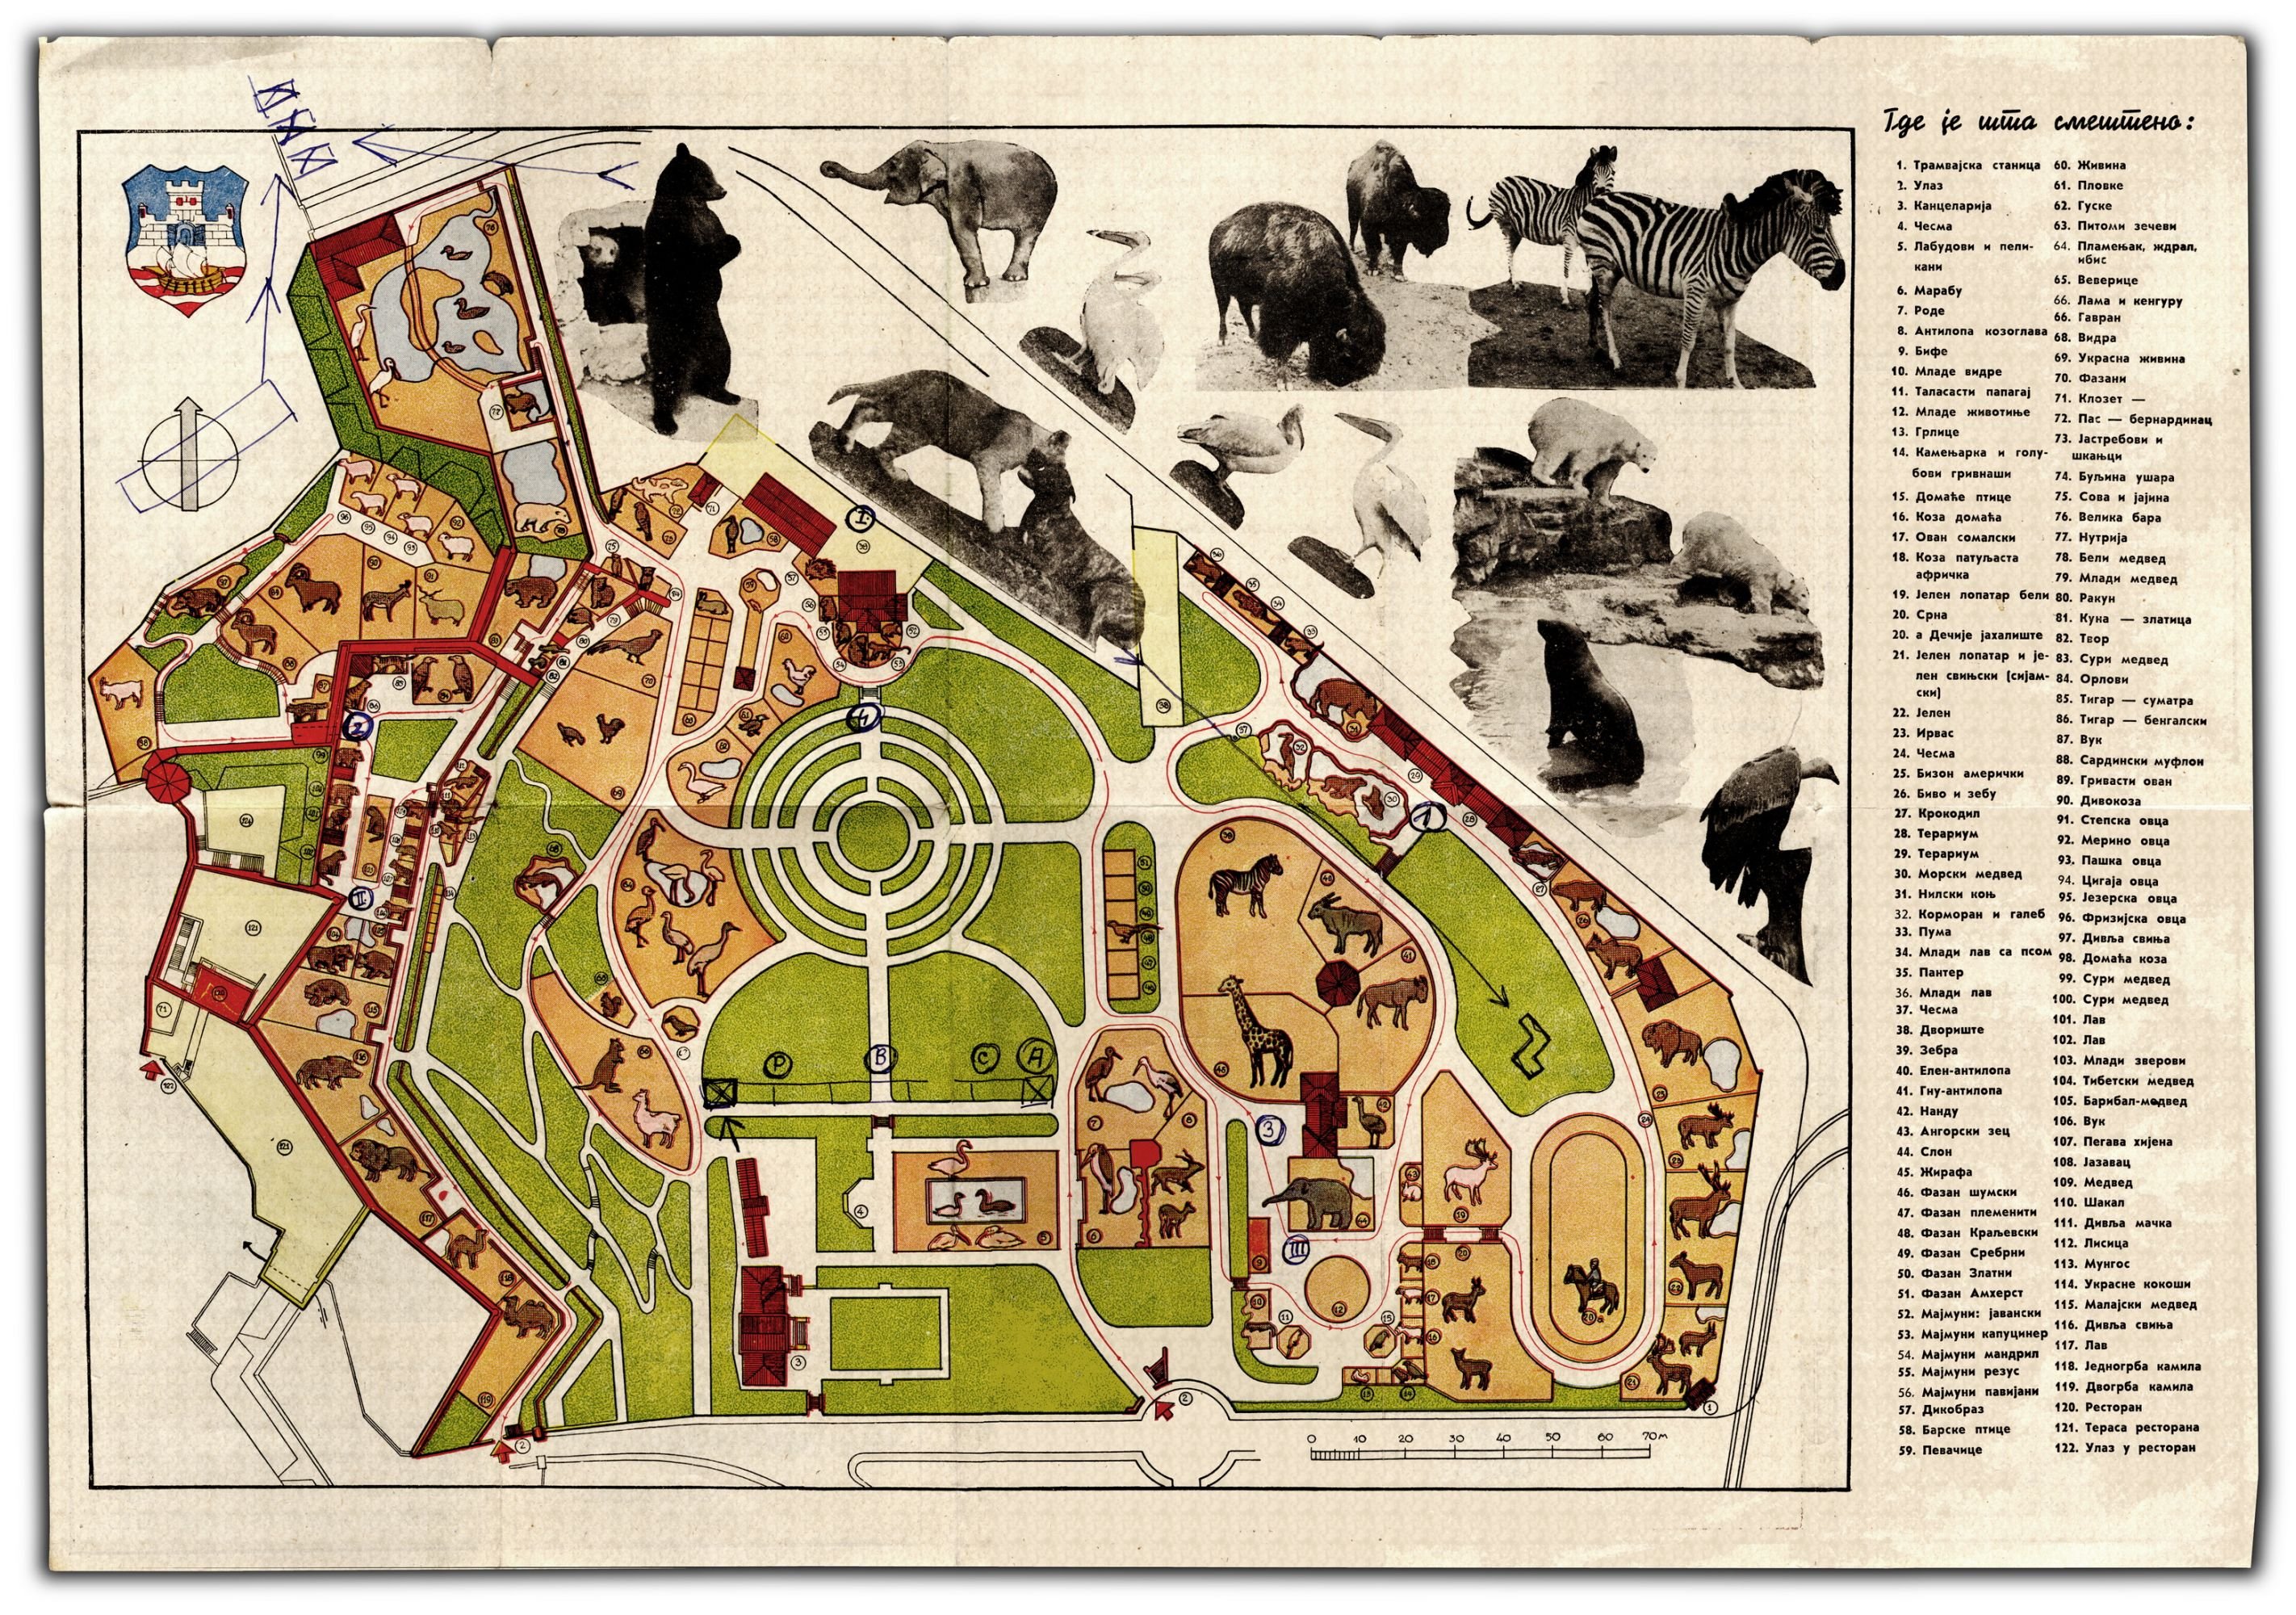 A Map of the Belgrade Zoo, 1939